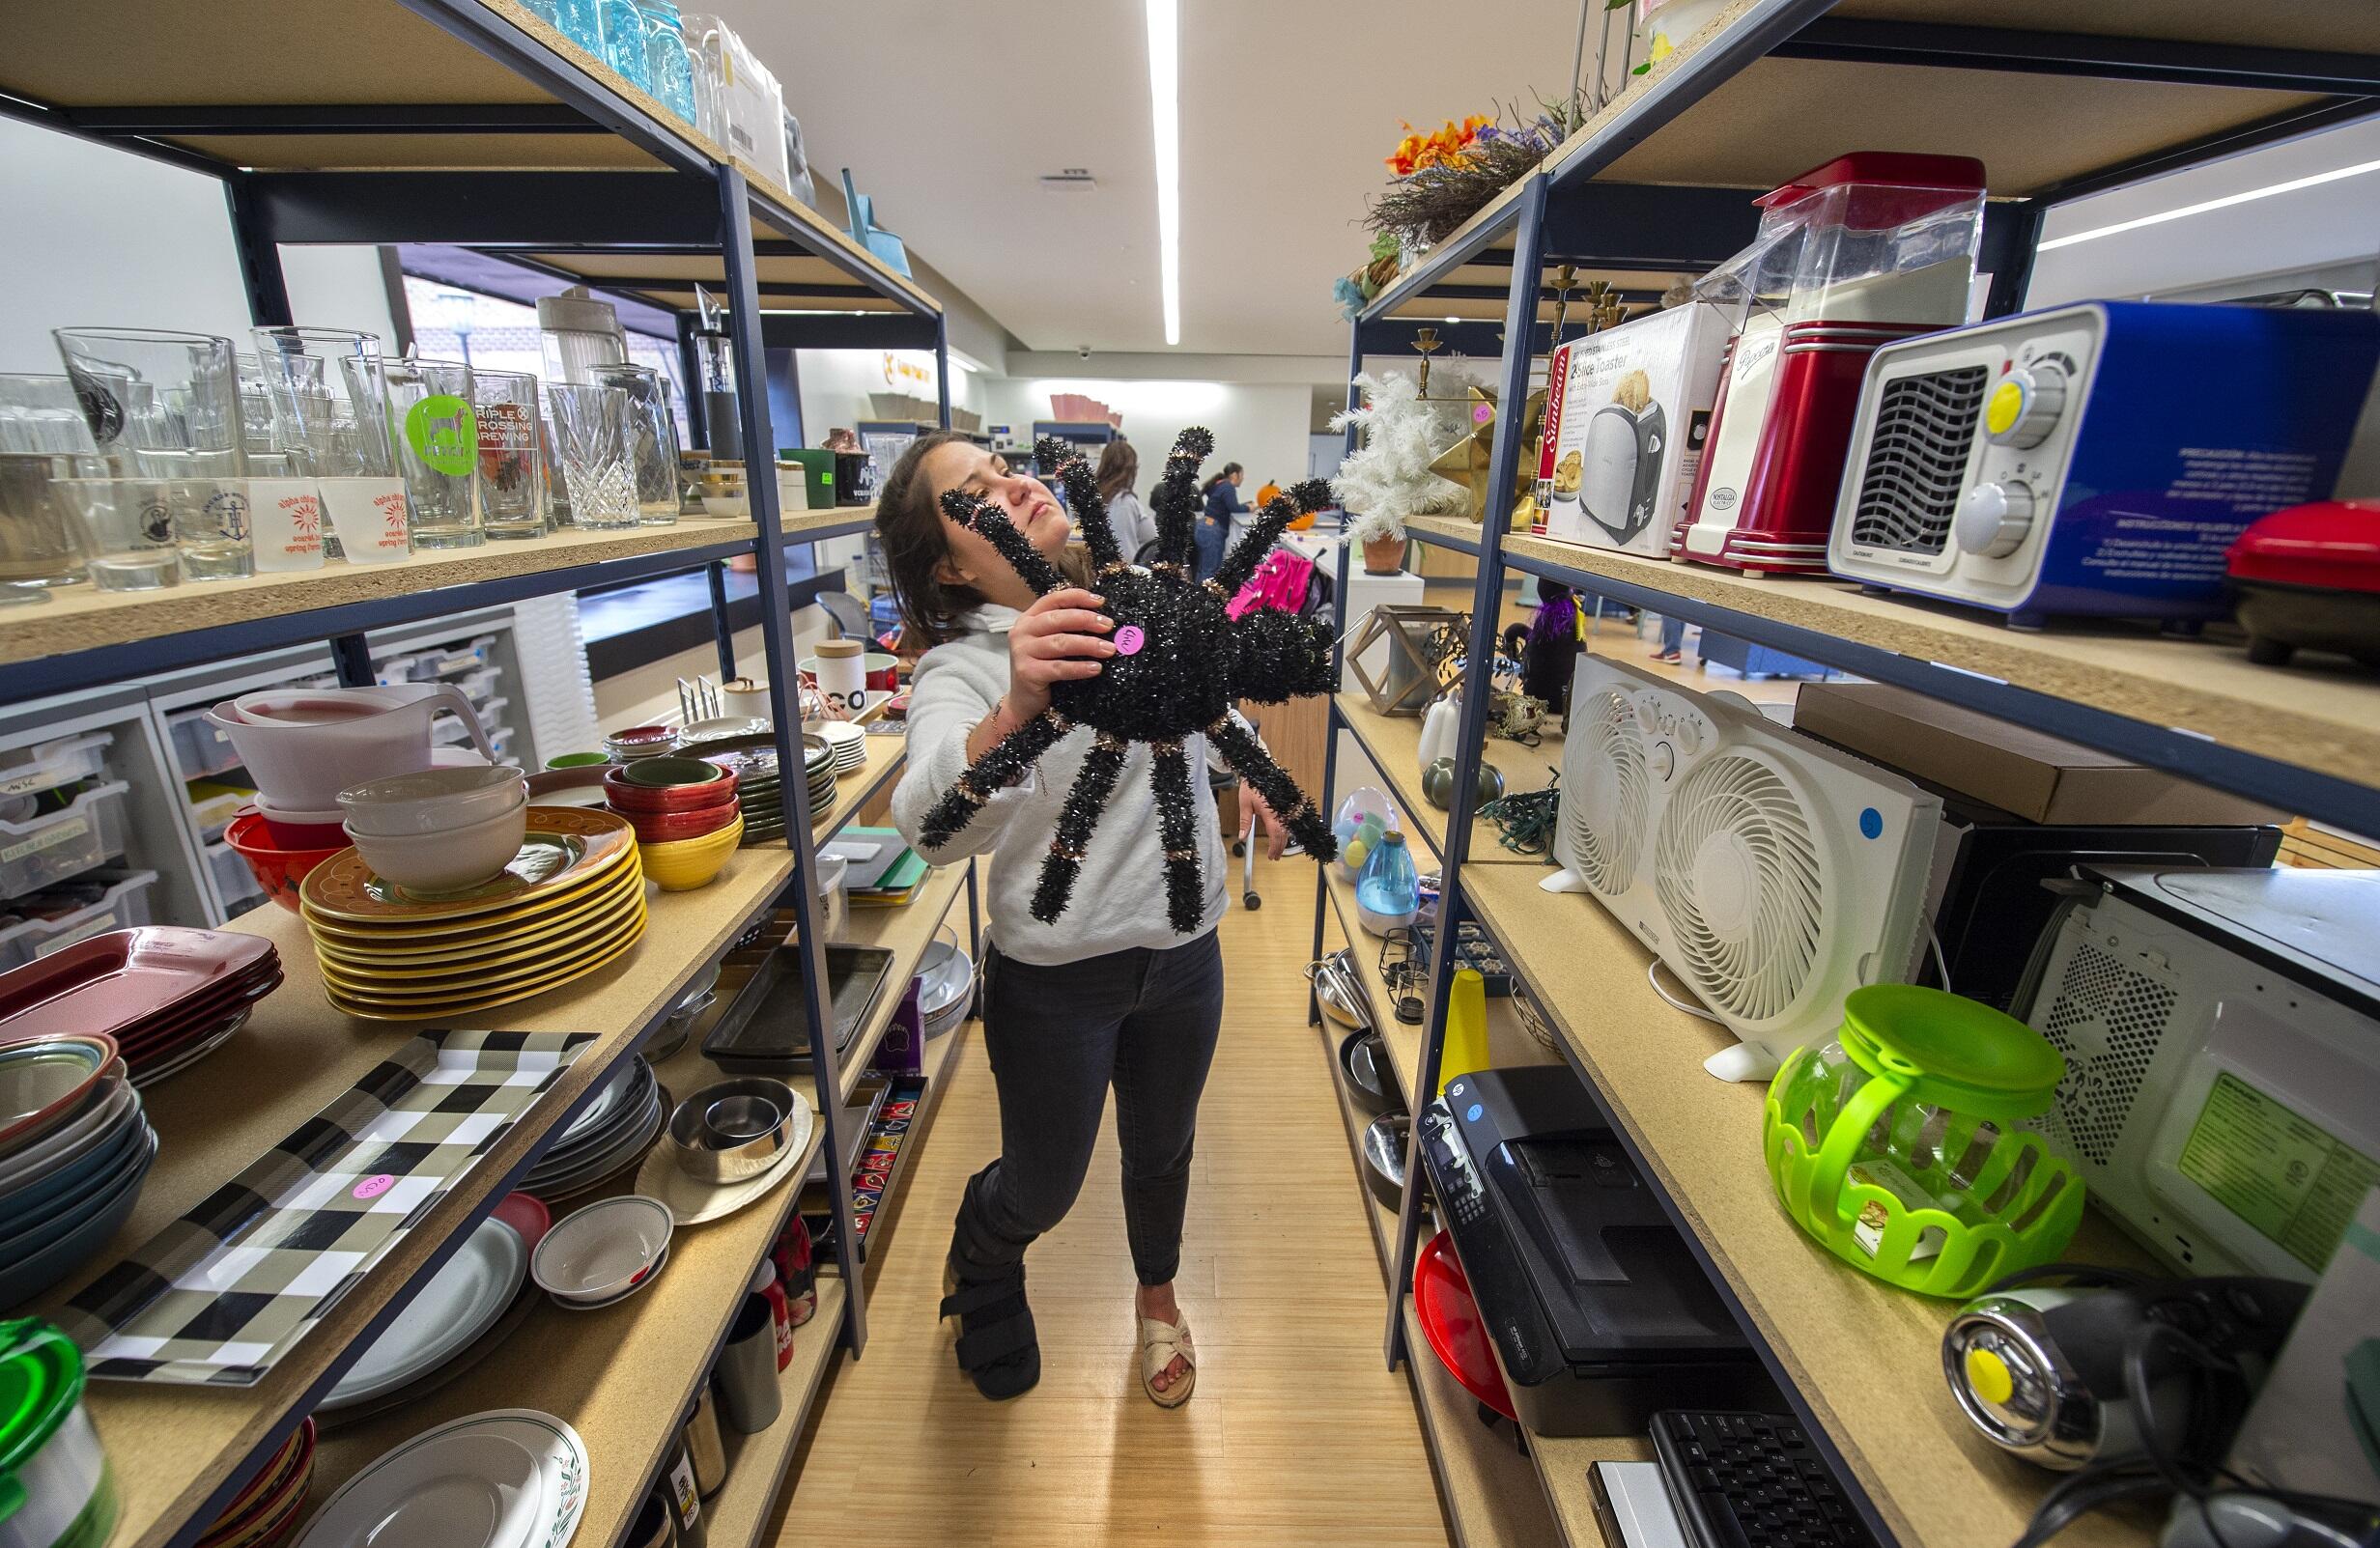 A photot of a woman in an isle between two shelving uinits holding a large fake spider. 